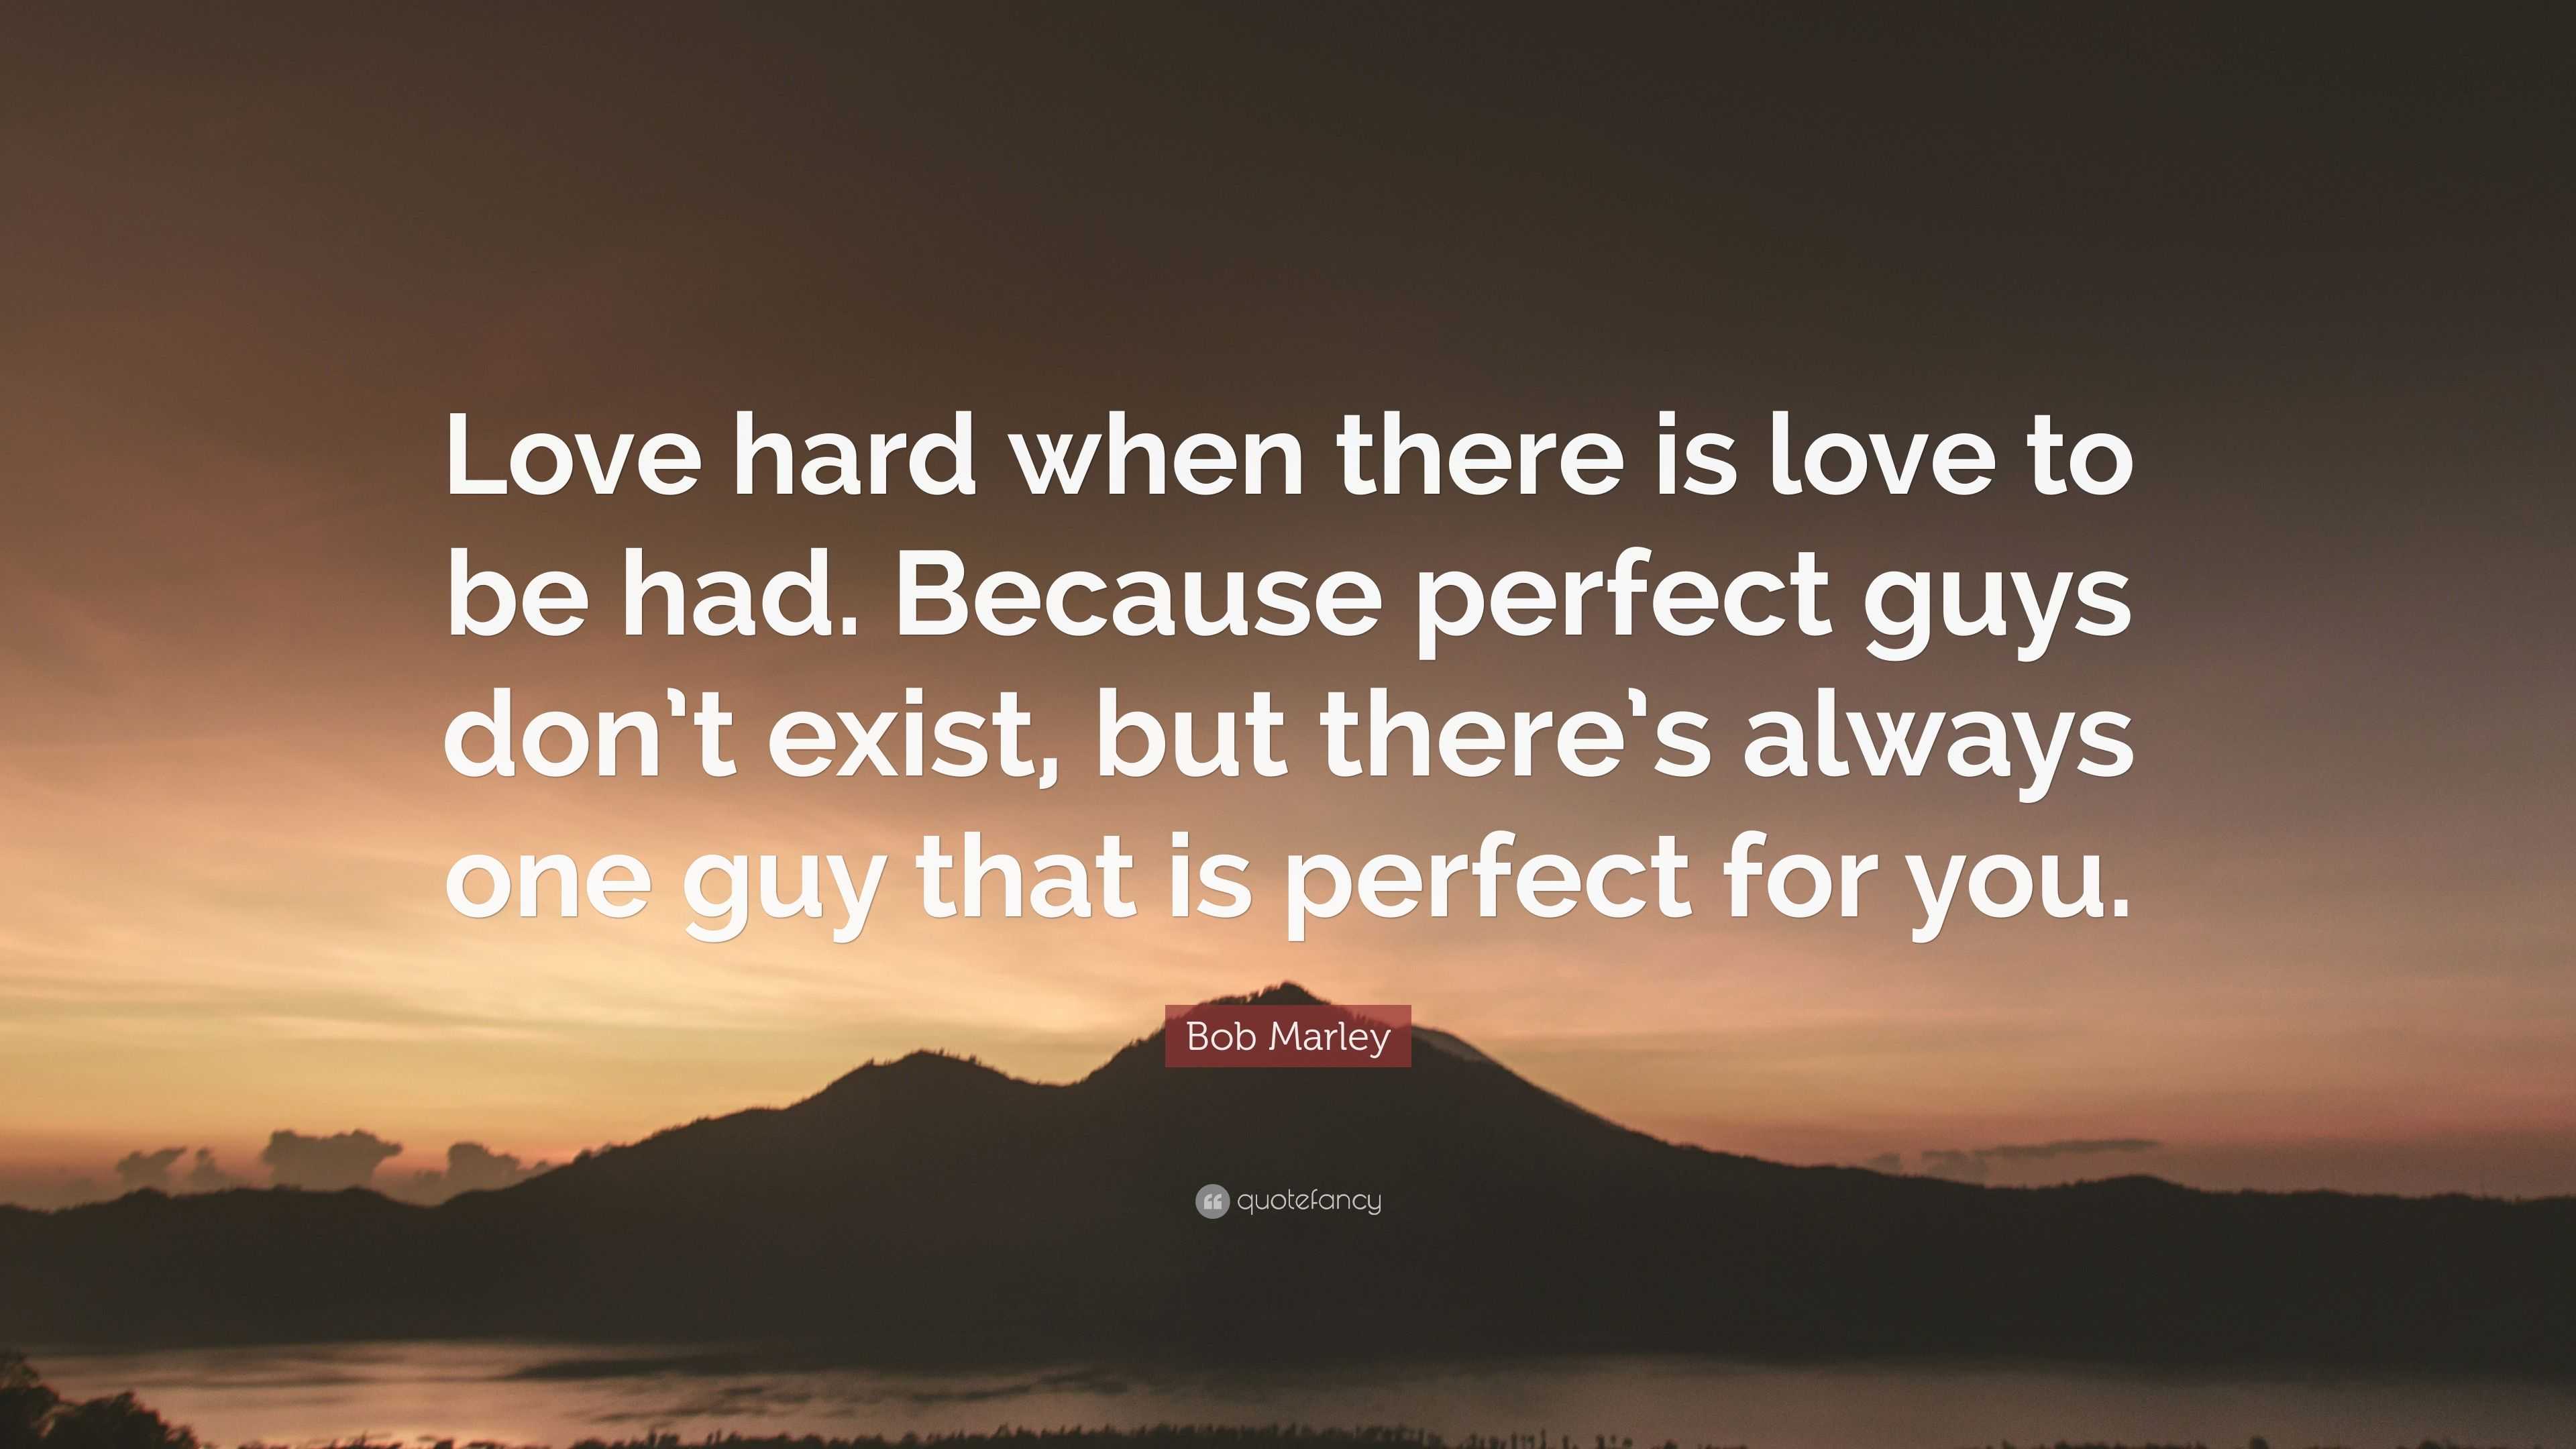 Bob Marley Quote “Love hard when there is love to be had Because